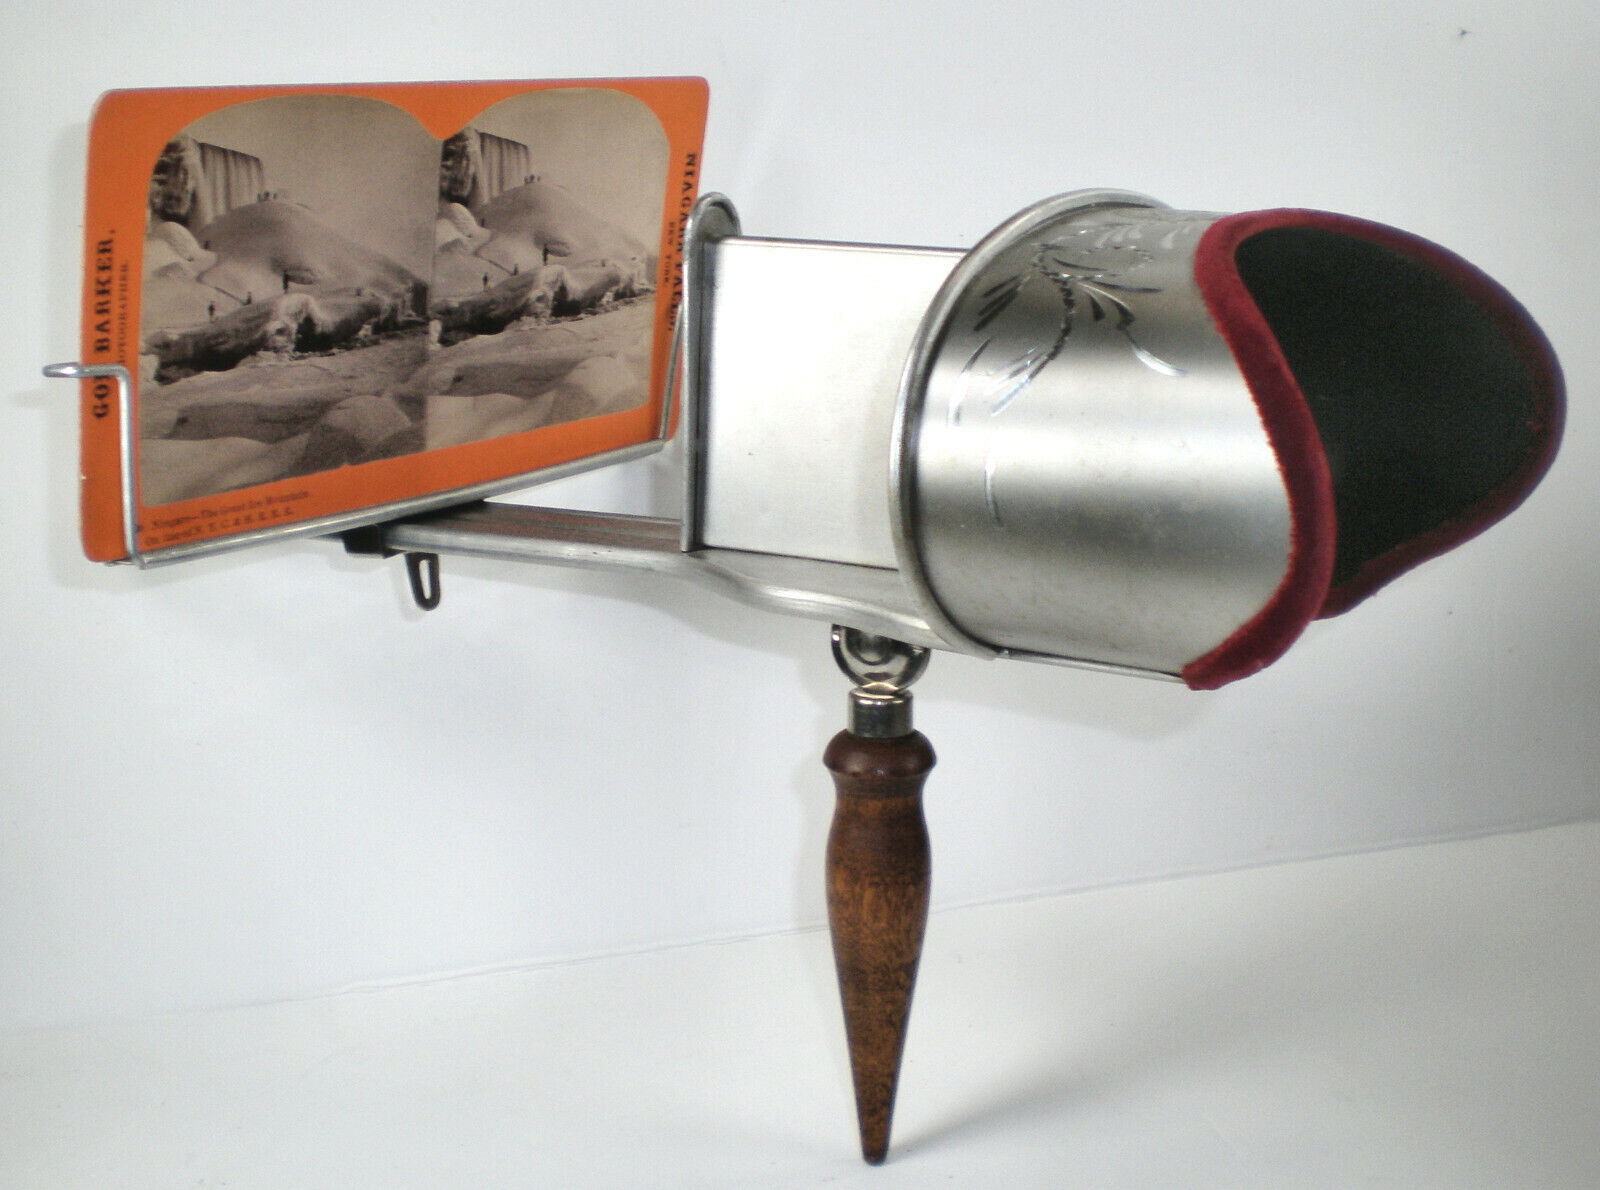 Vintage Perfecscope Stereoviewer ~ Stereoscope ~ Stereoview Viewer ~ 1902 Patent